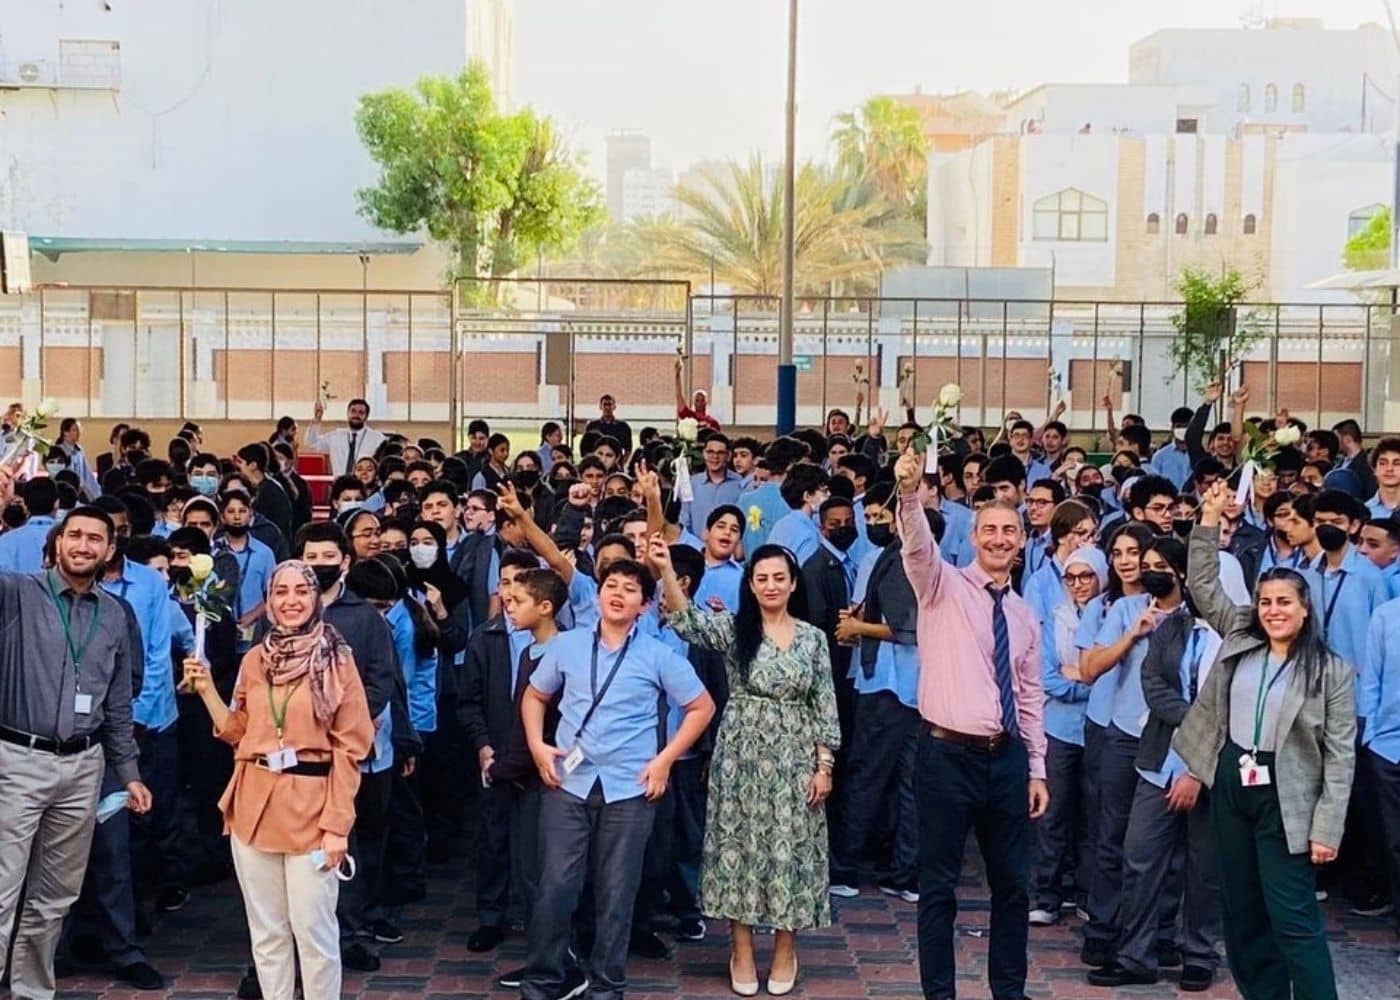 Teachers and students of Abu Dhabi International School at the Teachers' Day event